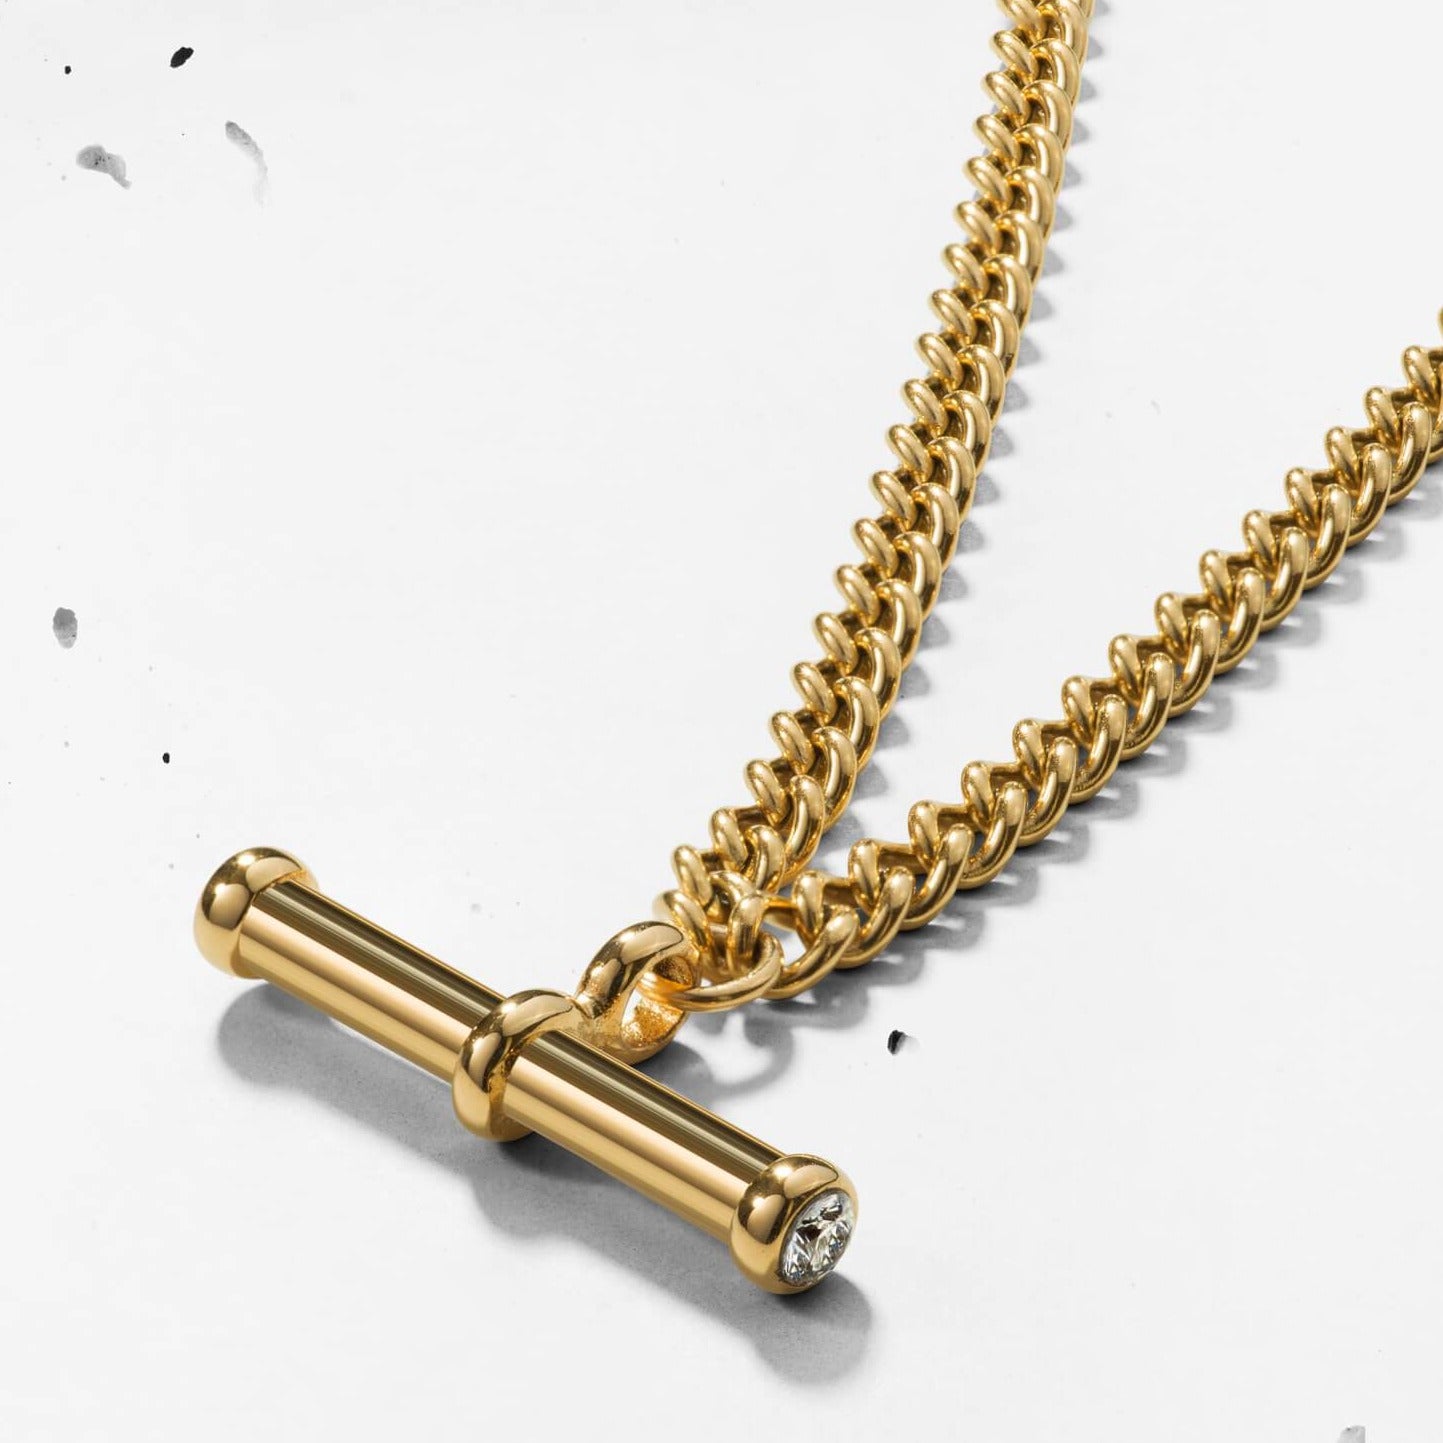 T-bar Charm Necklace